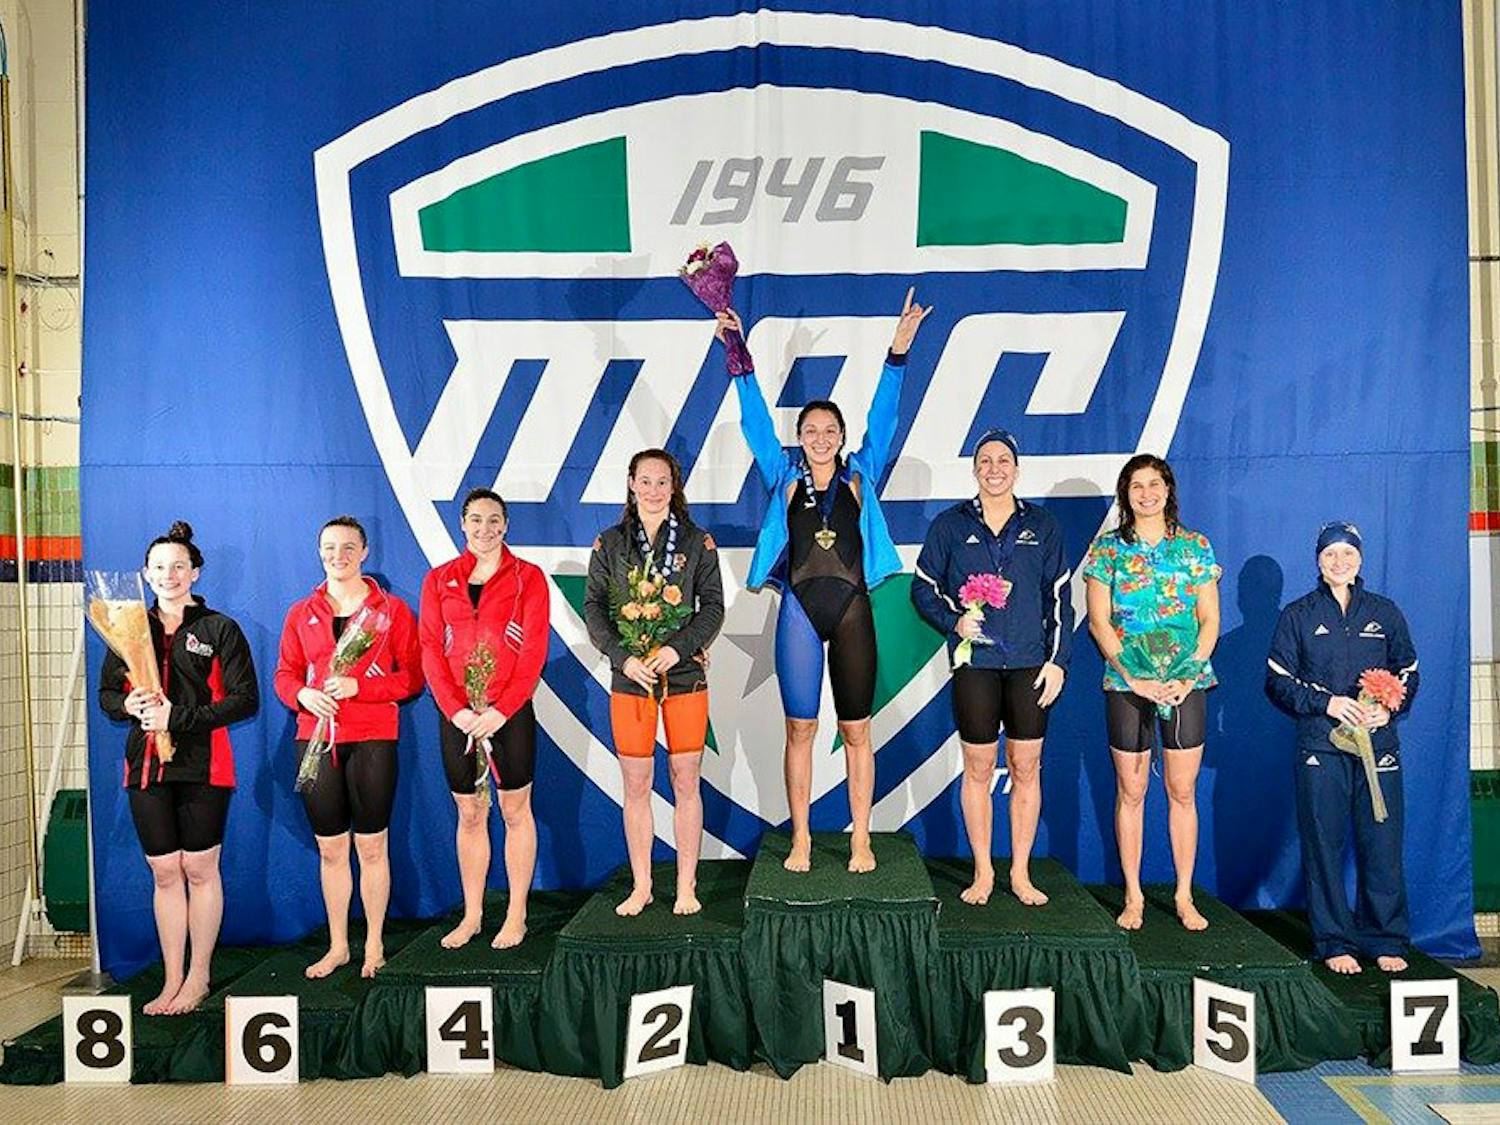 Megan Burns stands with her hands raised in celebration after winning the 100-meter relay at the swimming and diving MAC Championships last February. The victory was part of a perfect 52-0 season for the freshman.